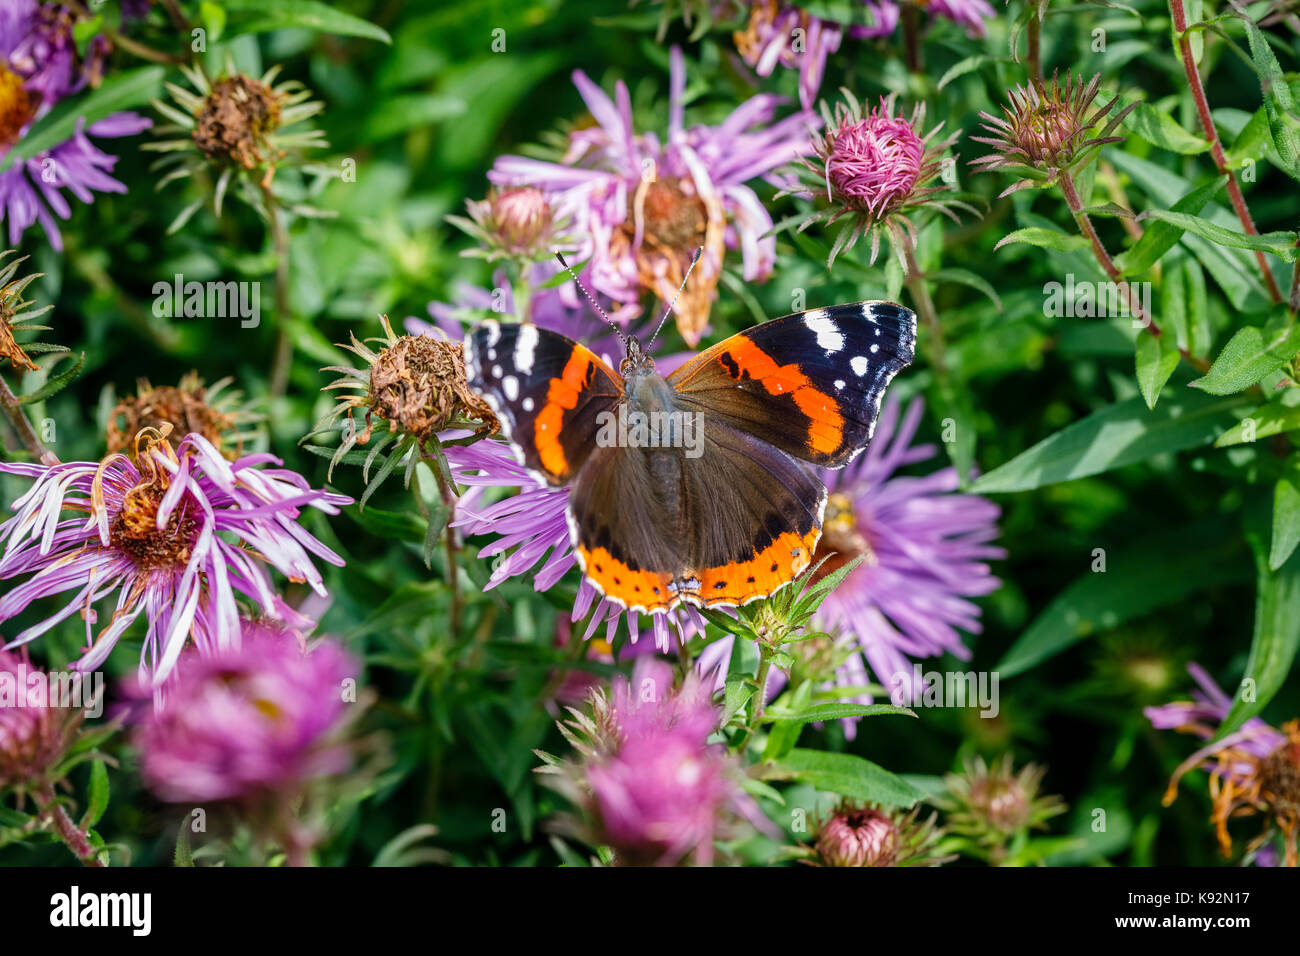 Red admiral butterfly, Vanessa atalanta, close-up dorsal view with open wings at rest on a flower, at RHS Garden Rosemoor, North Devon, England. Stock Photo